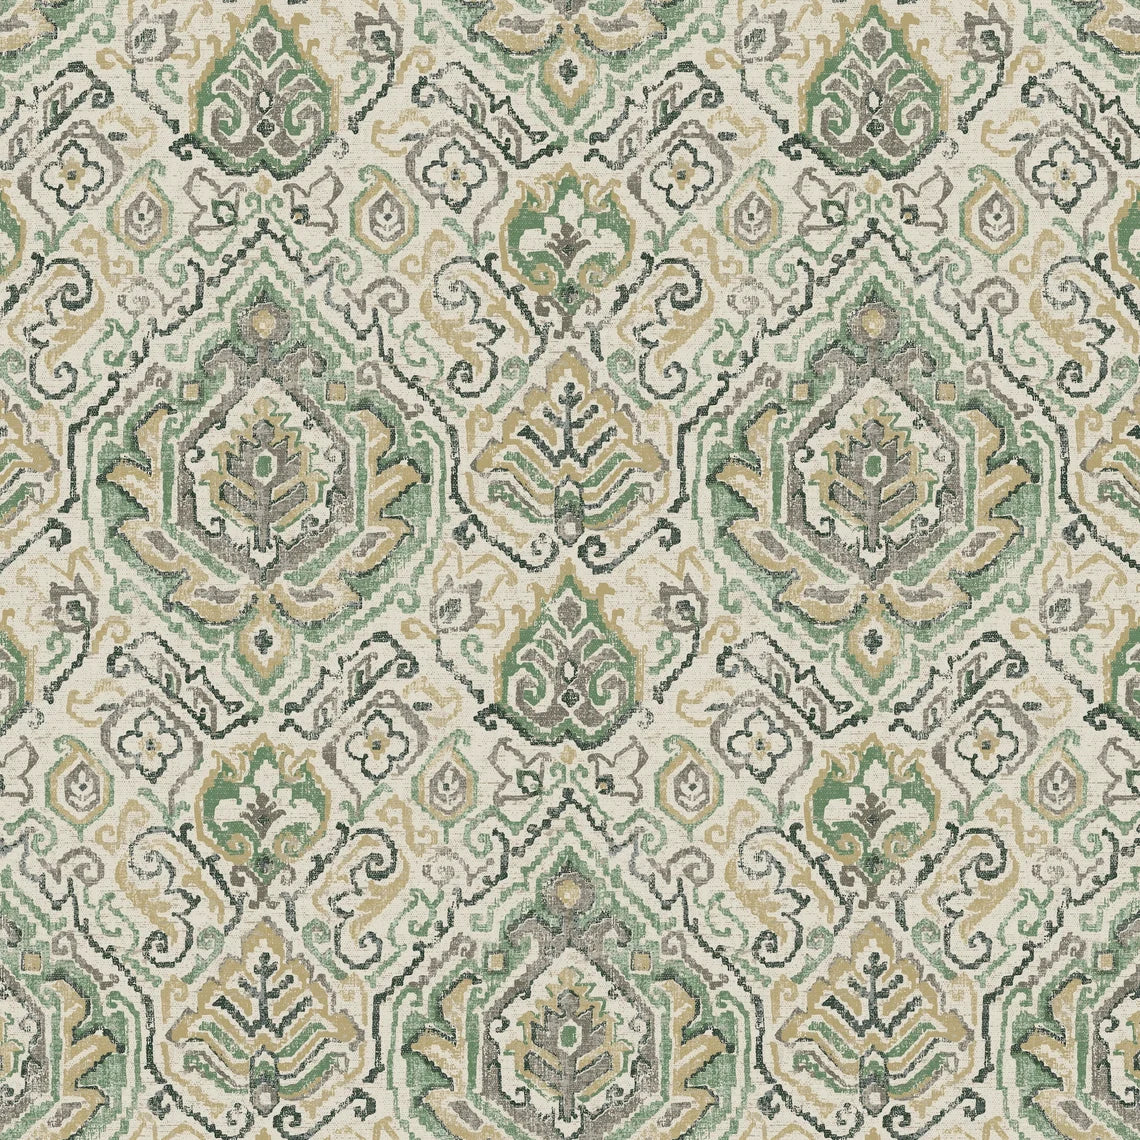 Duvet Cover in Cathell Meadow Green Medallion Weathered Persian Rug Design- Large Scale